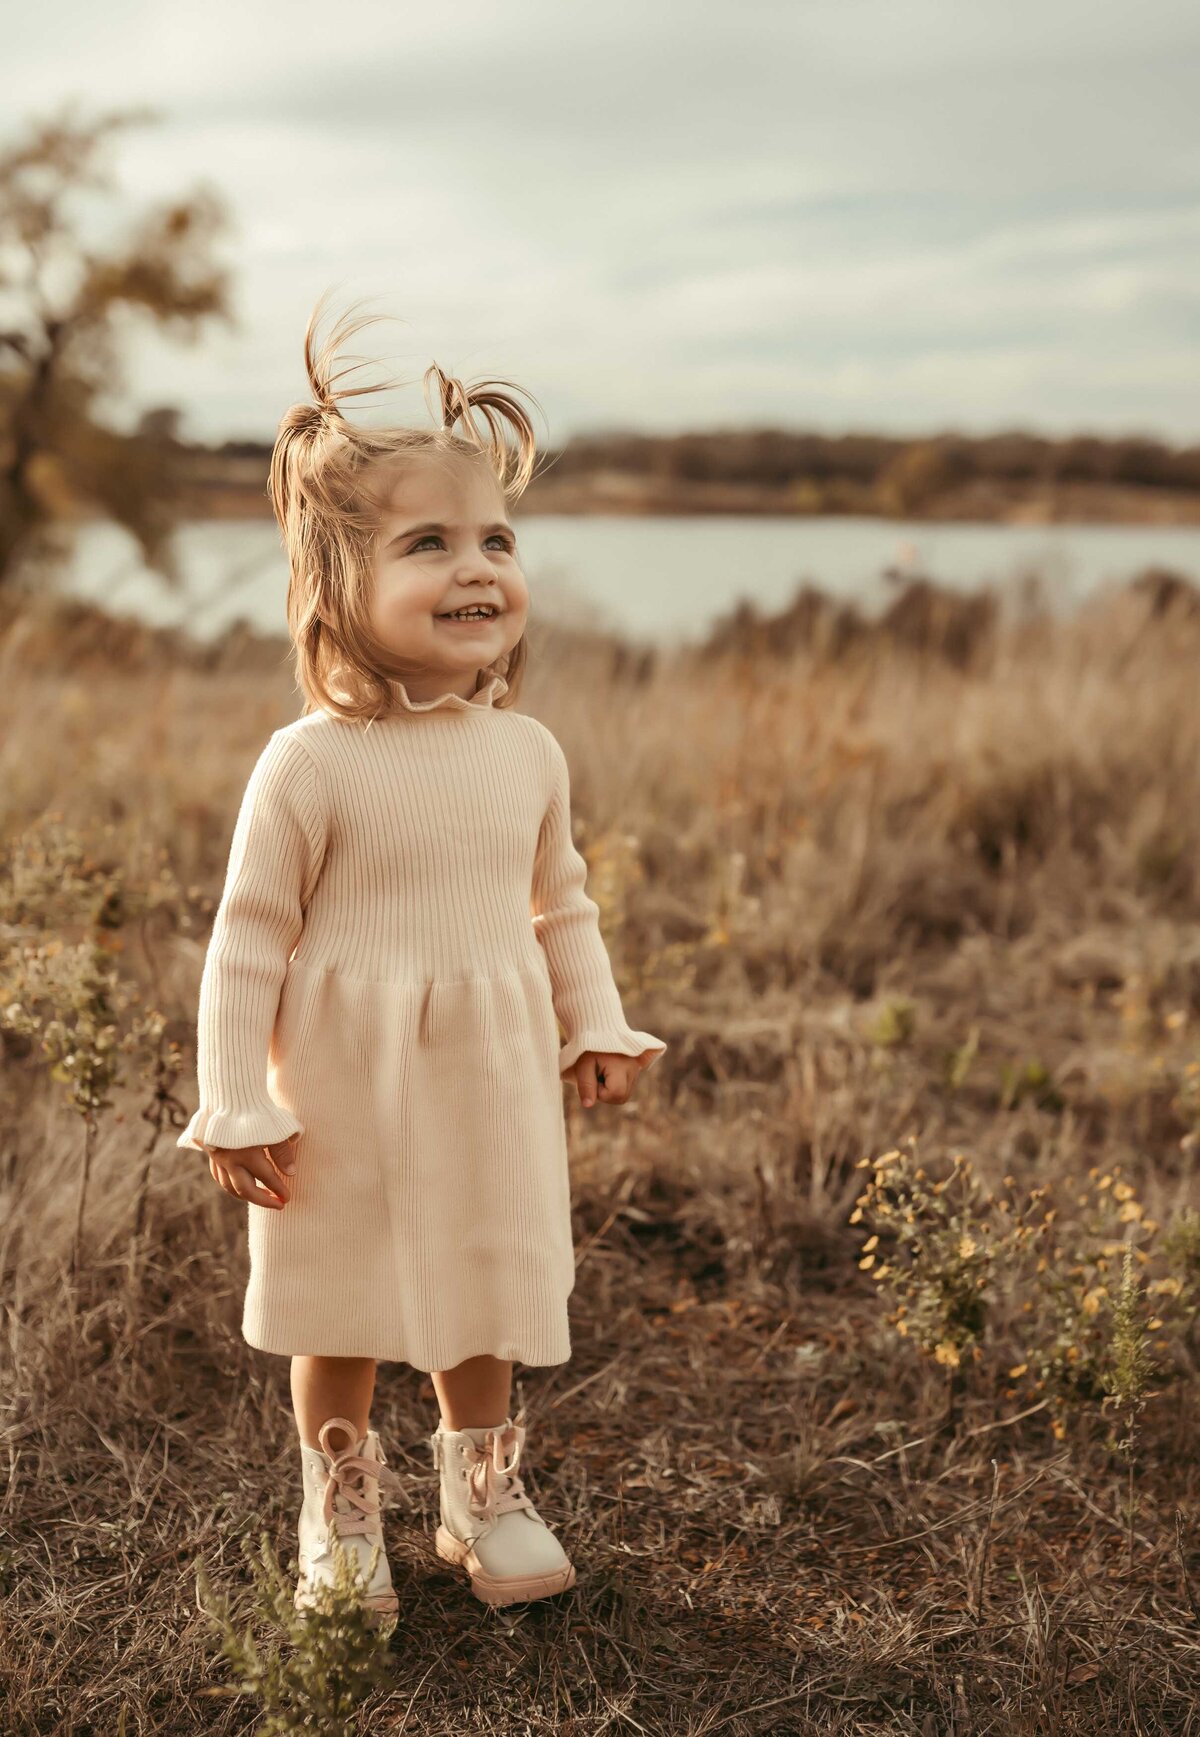 Little girl looking up at the sky smiling. She is wearing a soft pink knitted dress and white combat boots